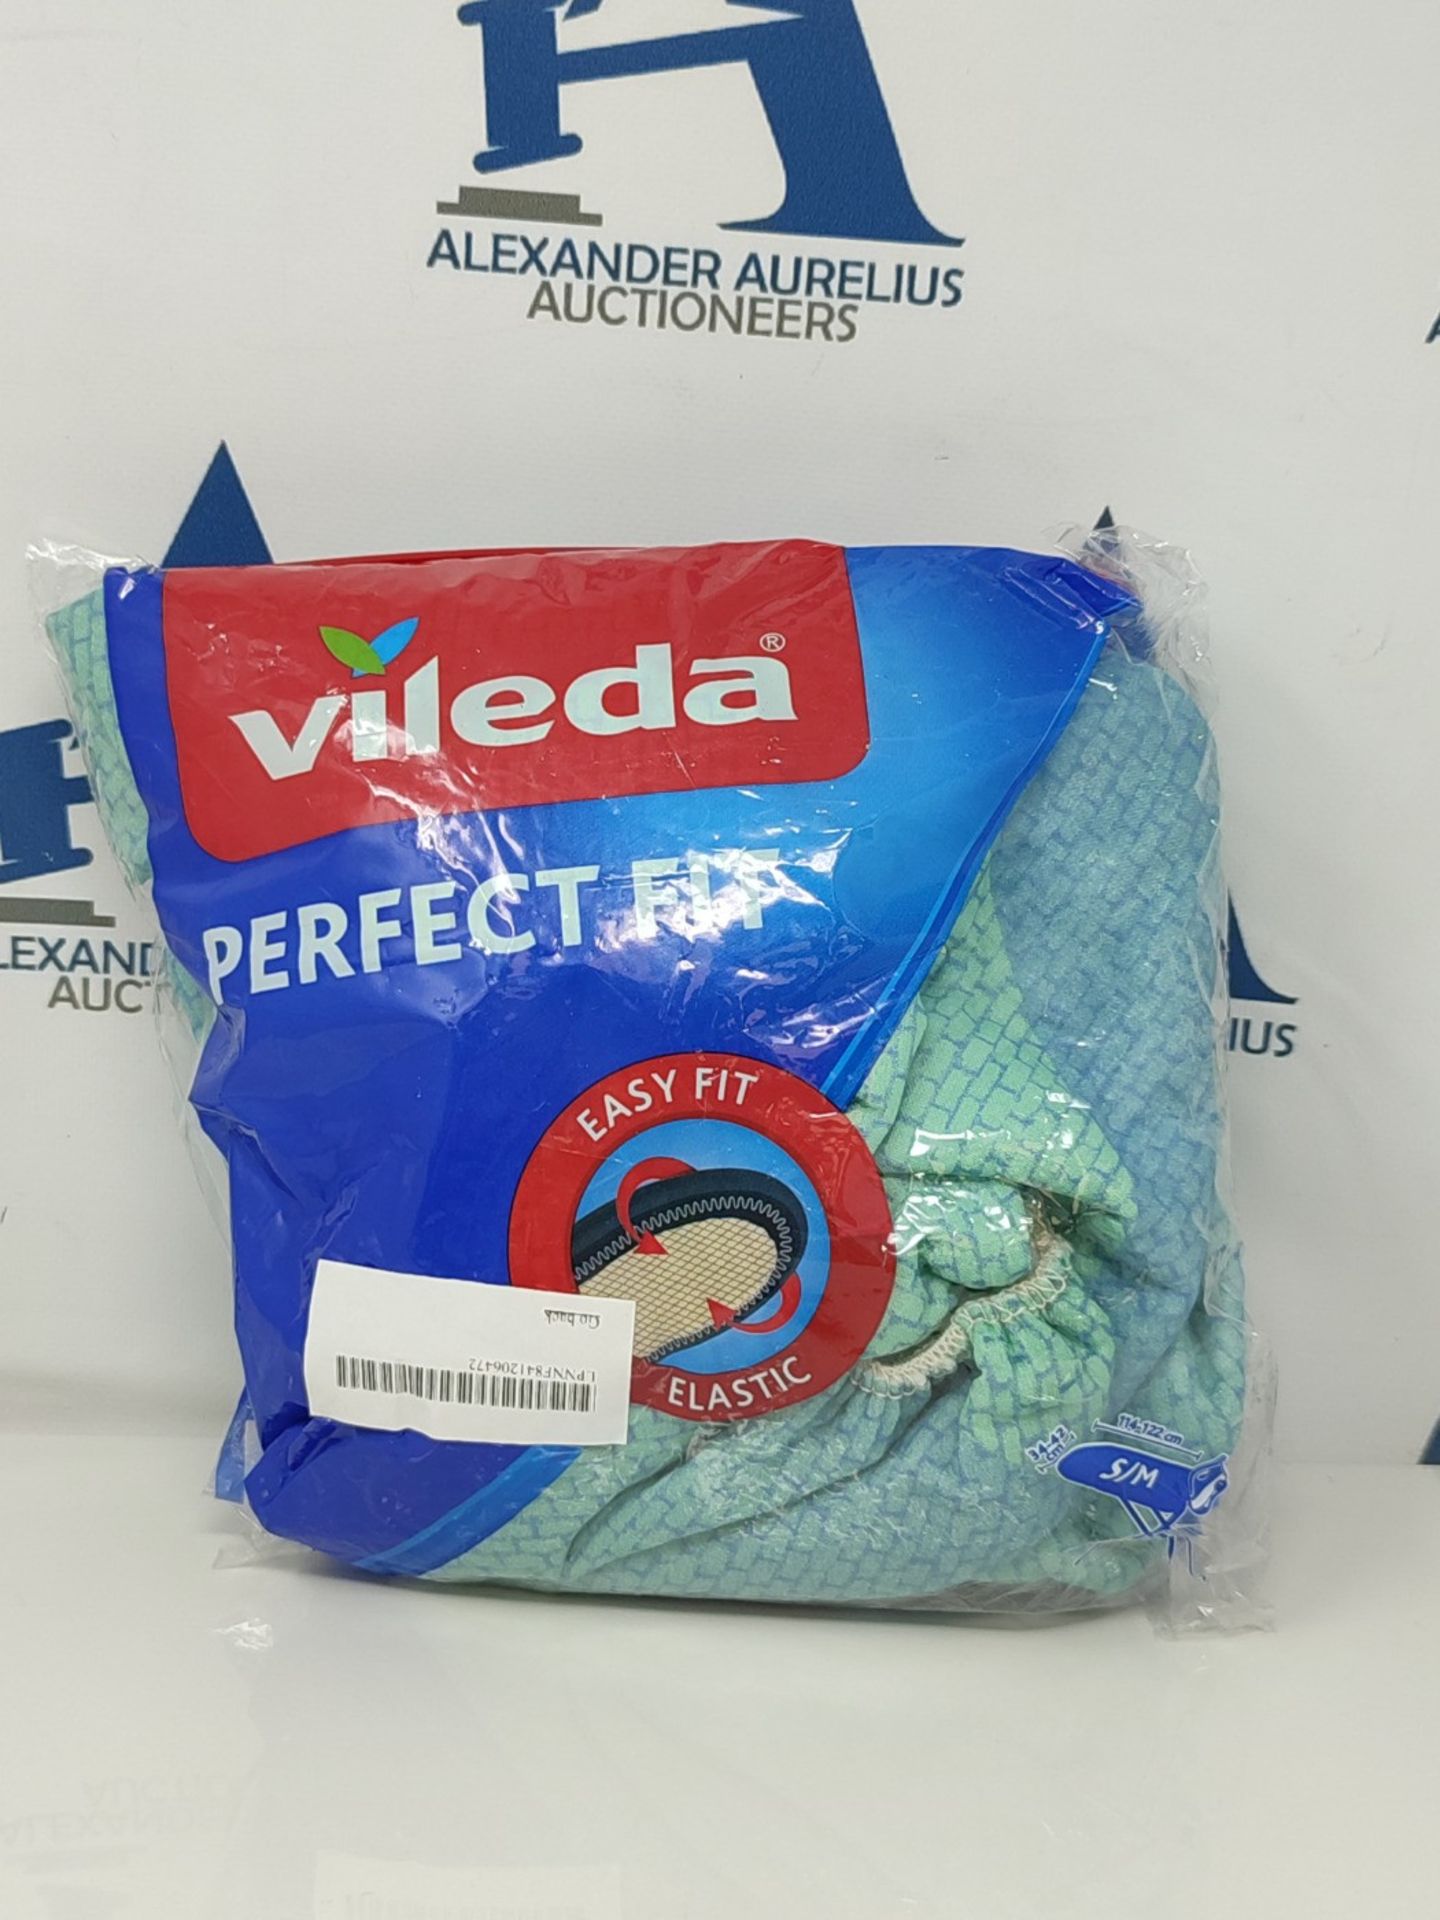 Vileda Perfect Fit Ironing Board Cover, Blue - Image 2 of 3